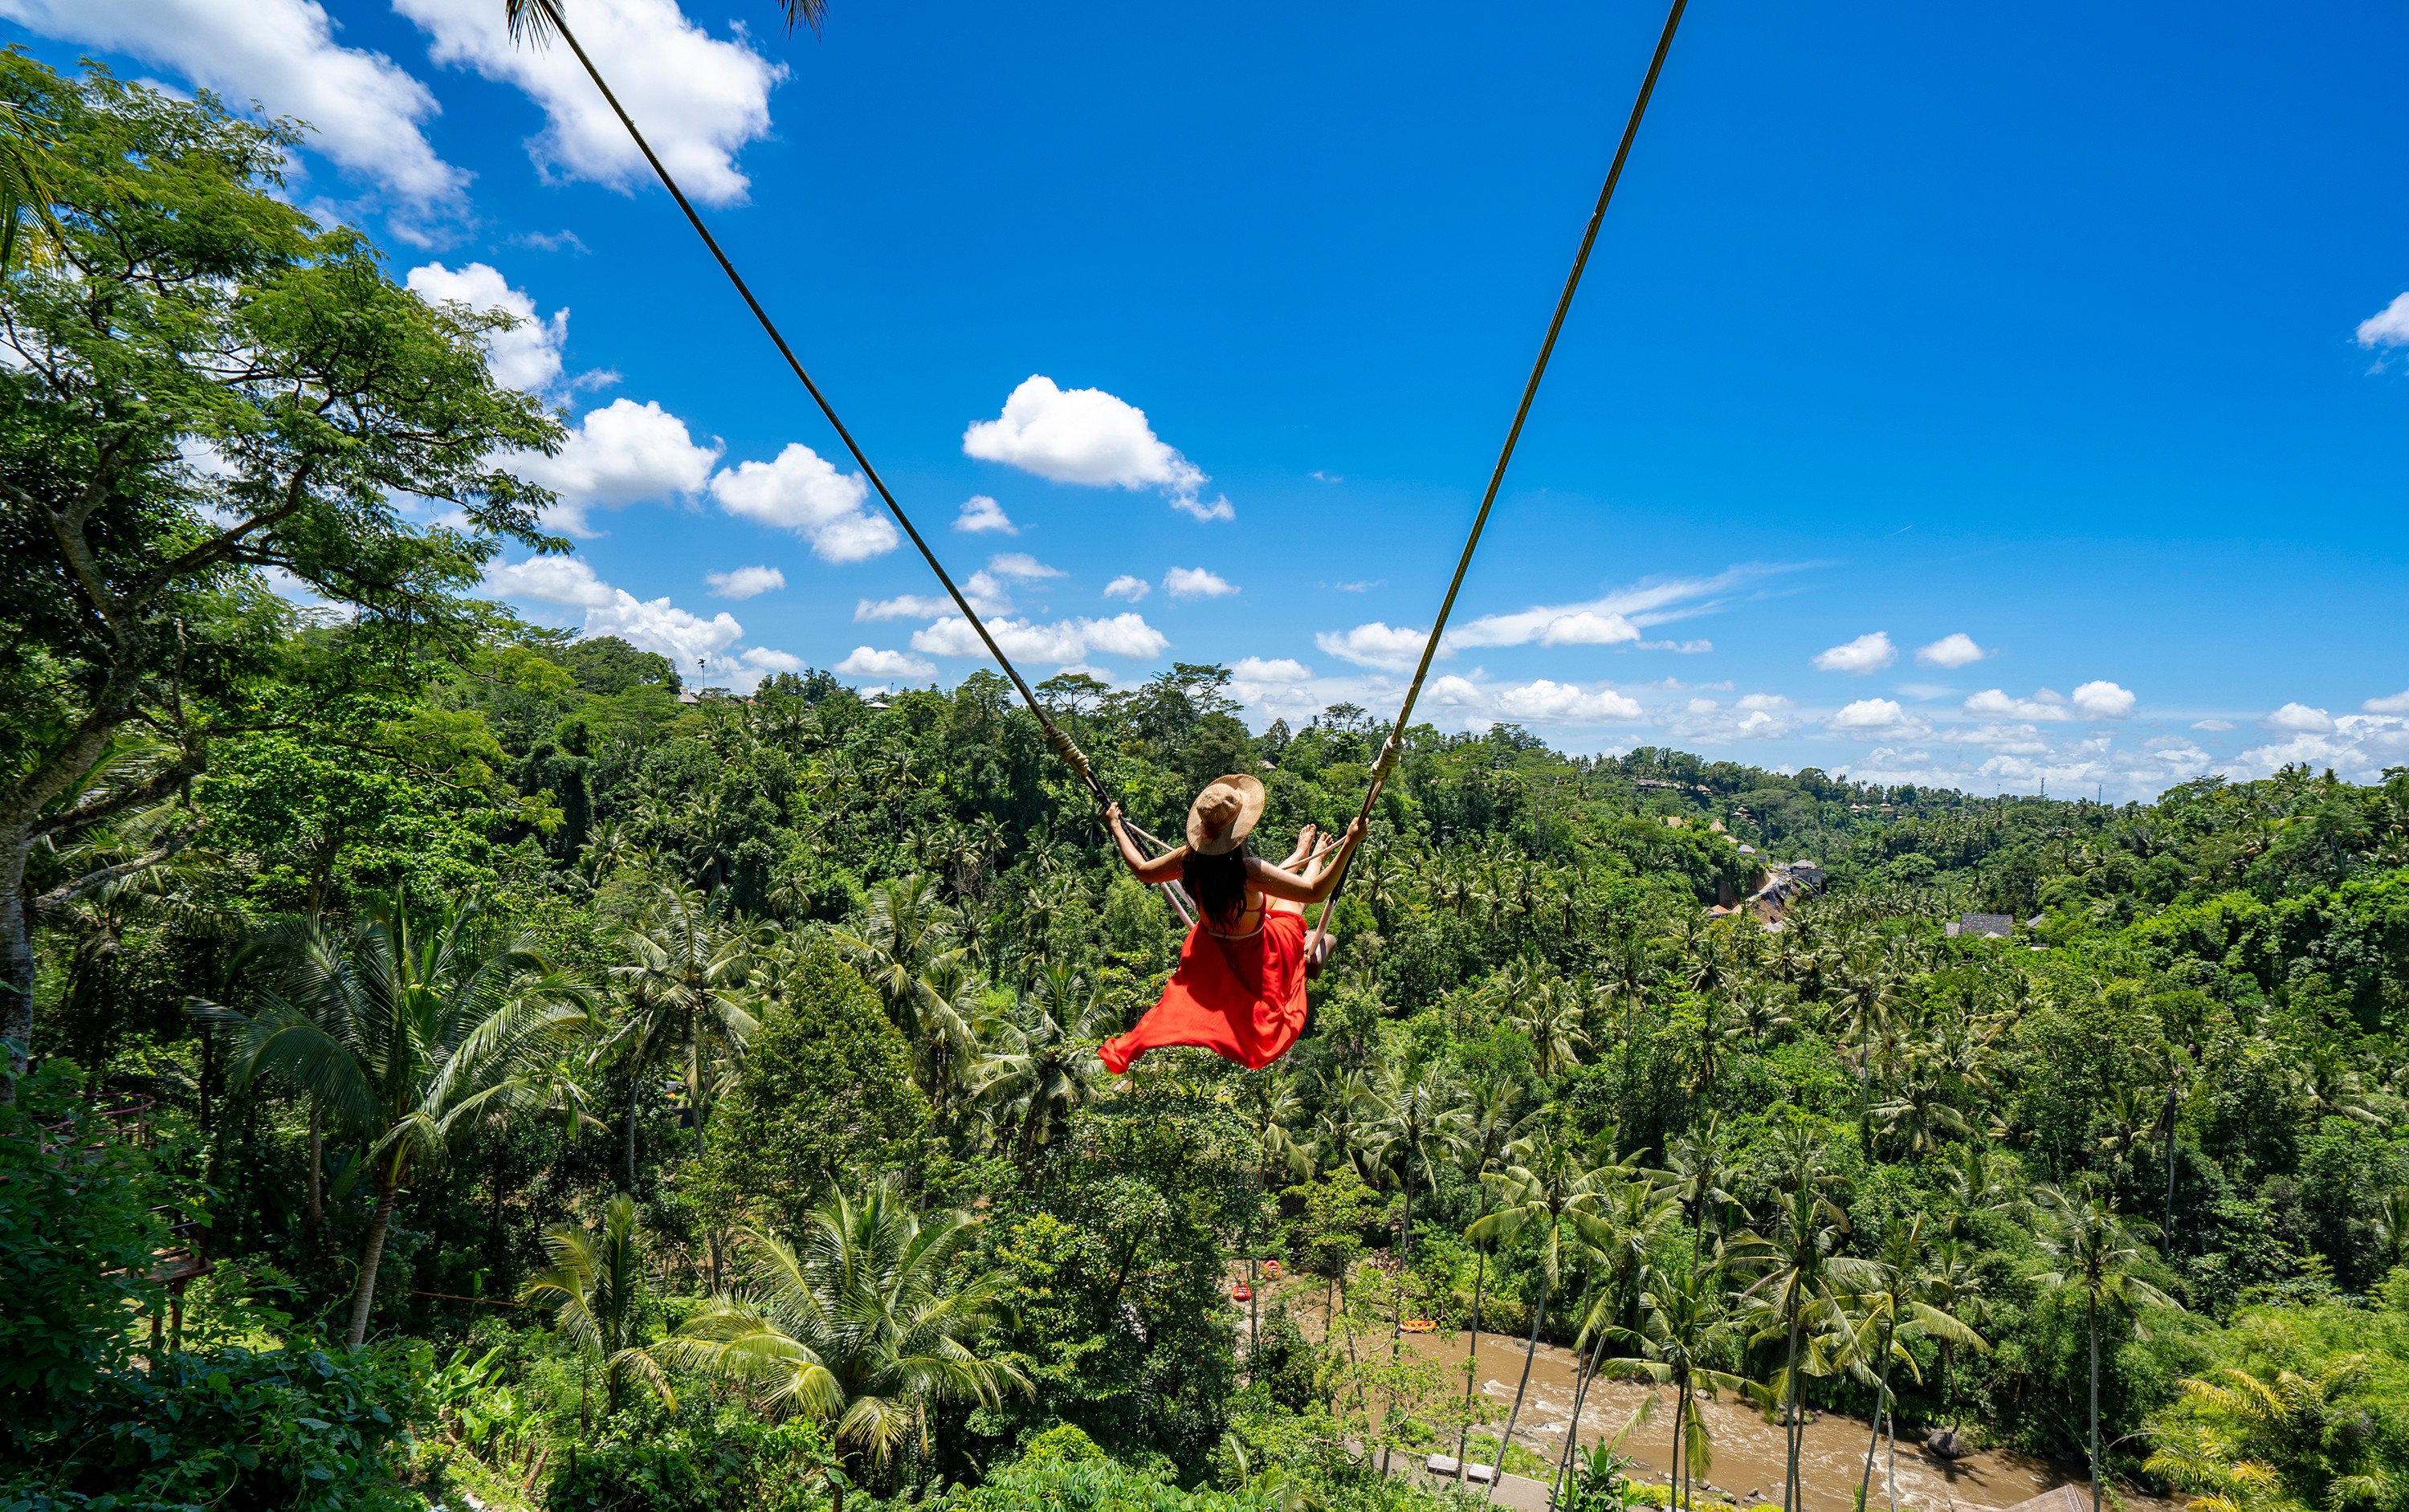 Swings placed at lookout points, such as those that are common in Bali, would be a great addition to Hong Kong’s tourist attraction portfolio, Ed Peters says. Photo: Shutterstock